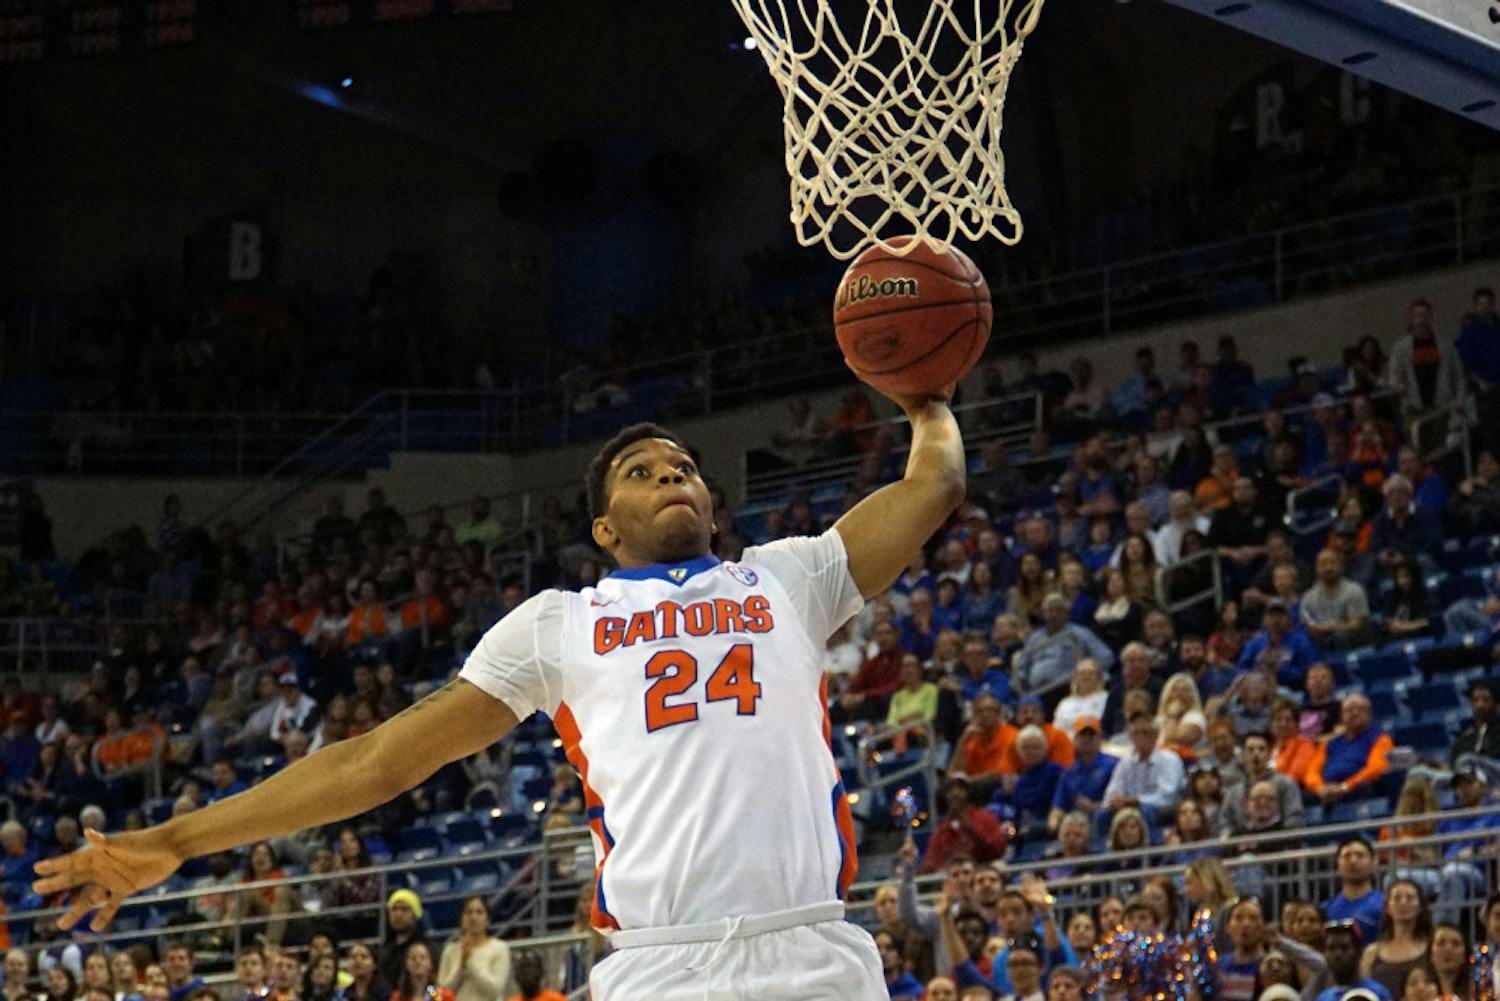 UF’s Justin Leon soars for a dunk during Florida’s 95-63 win against Auburn on Jan. 23, 2016, in the O’Connell Center.